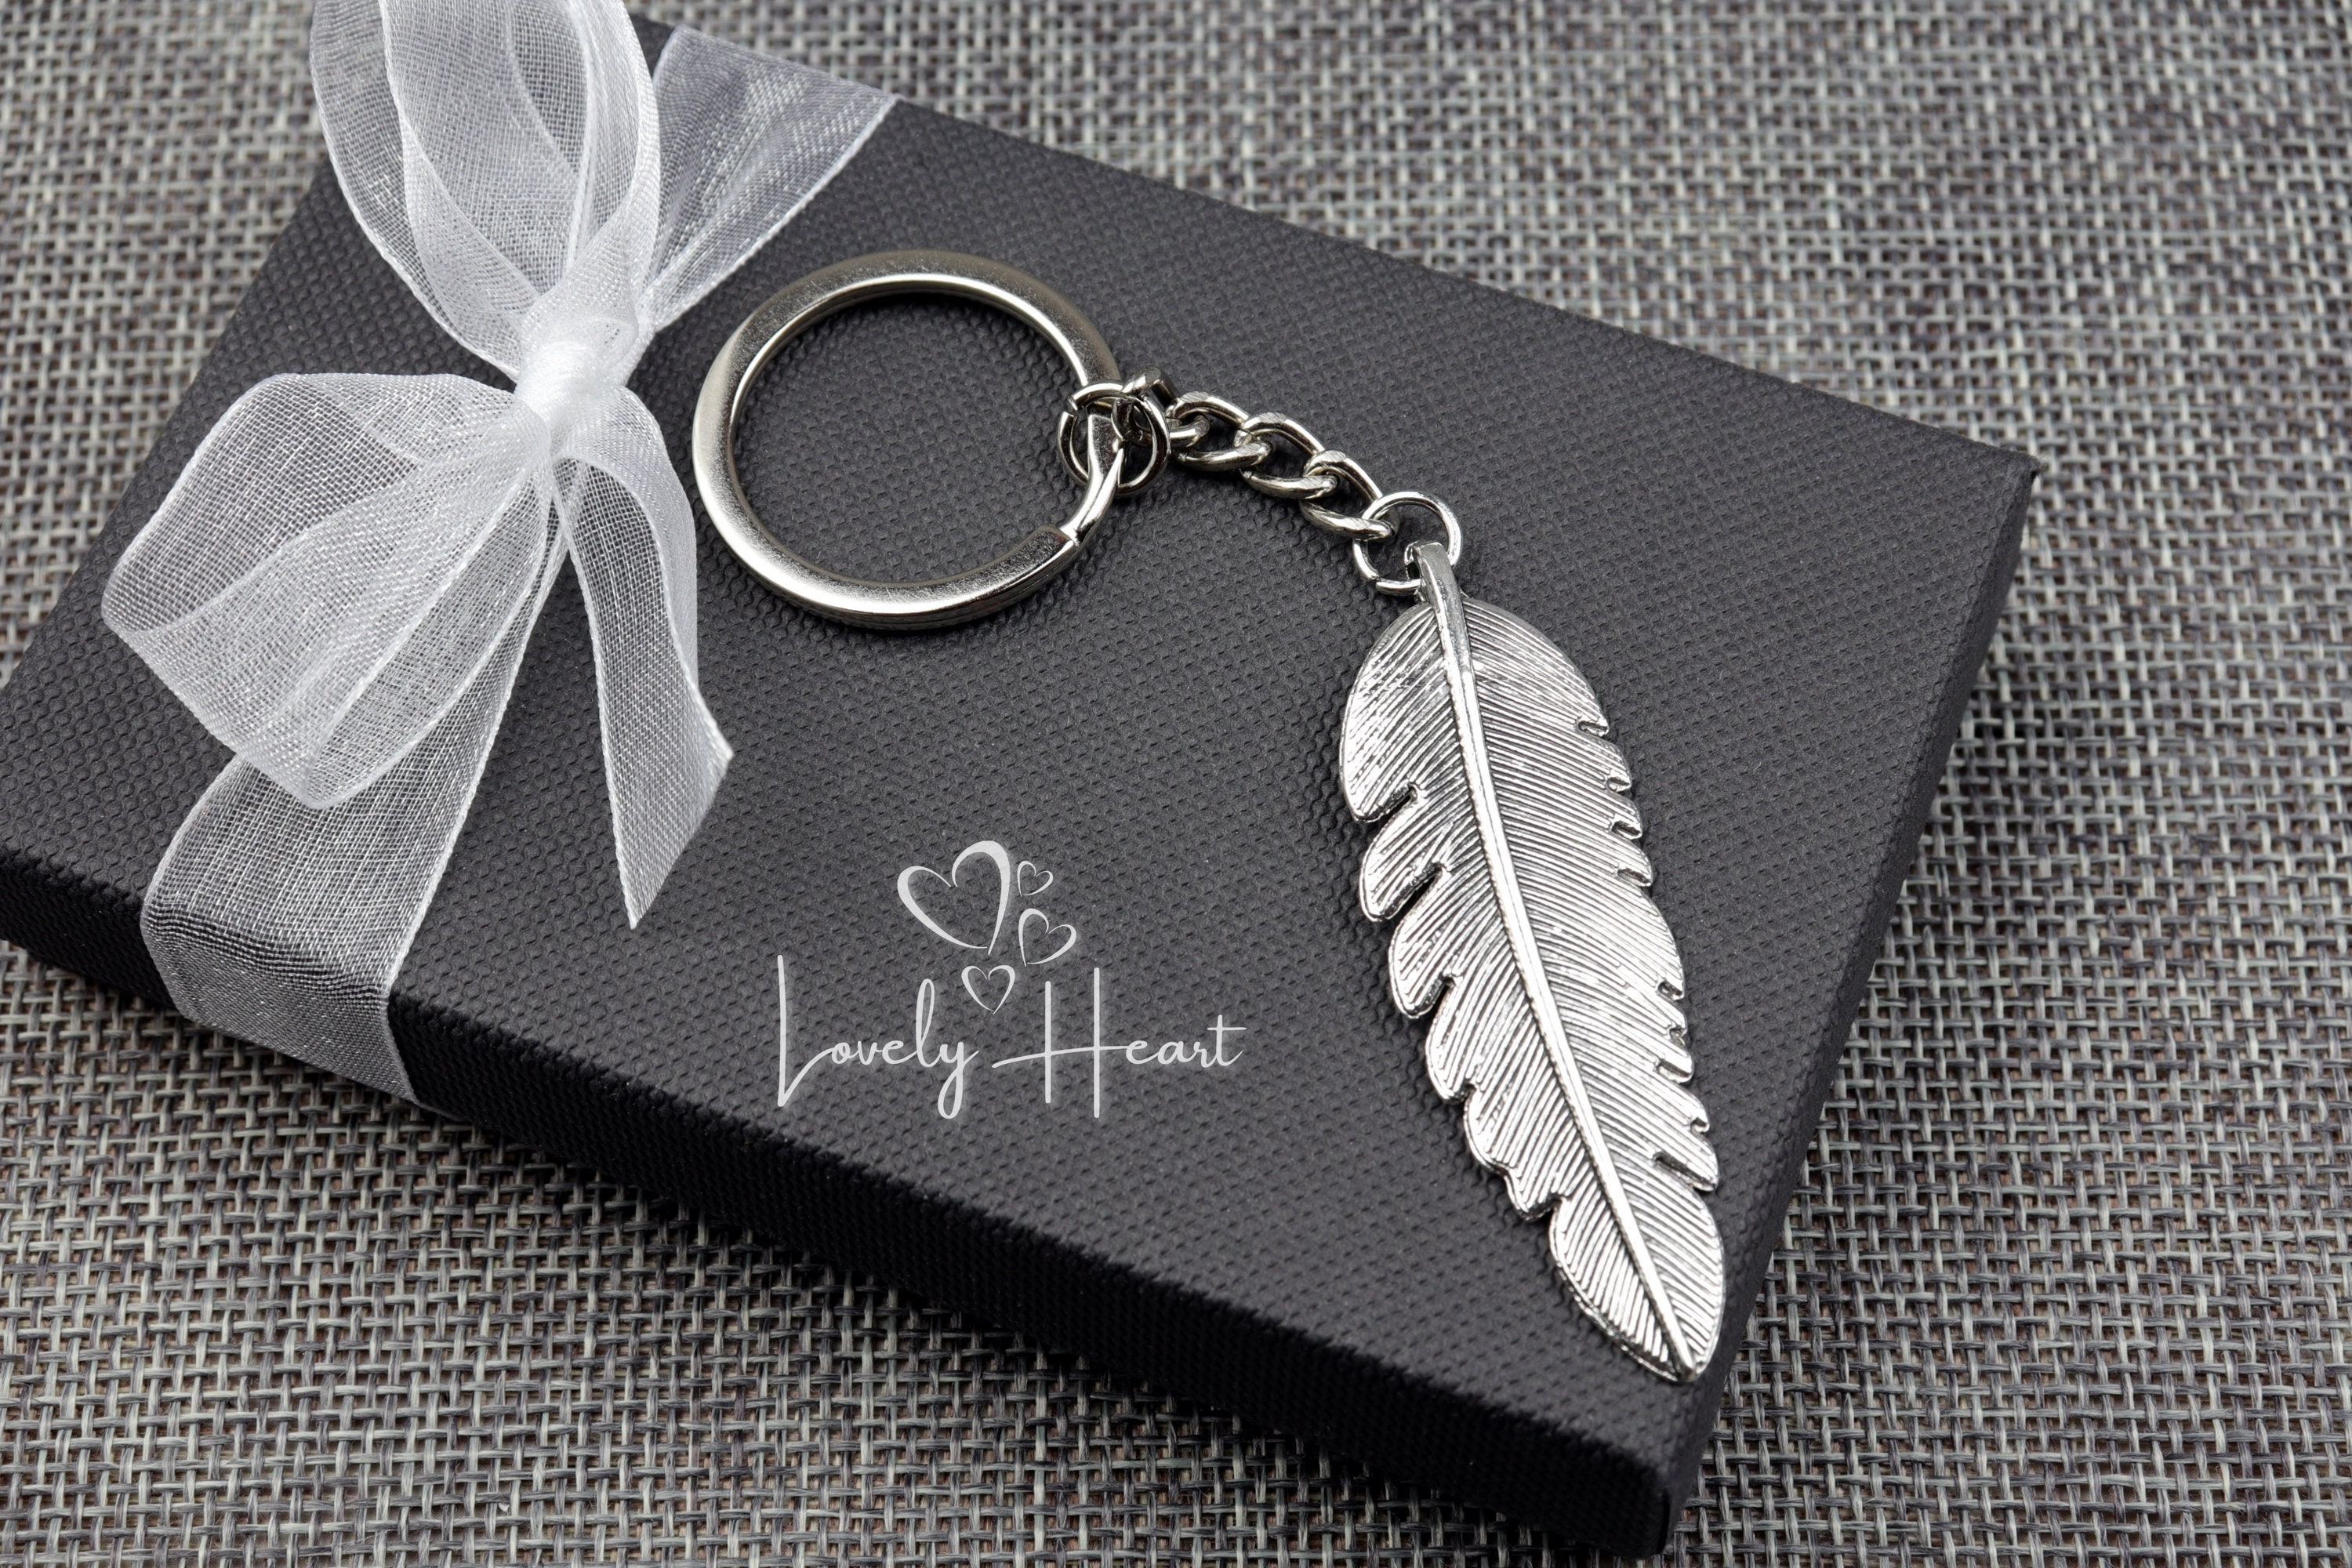 Metal Heart Keychain Featuring Cubic Zirconia Accents. - K (750256)